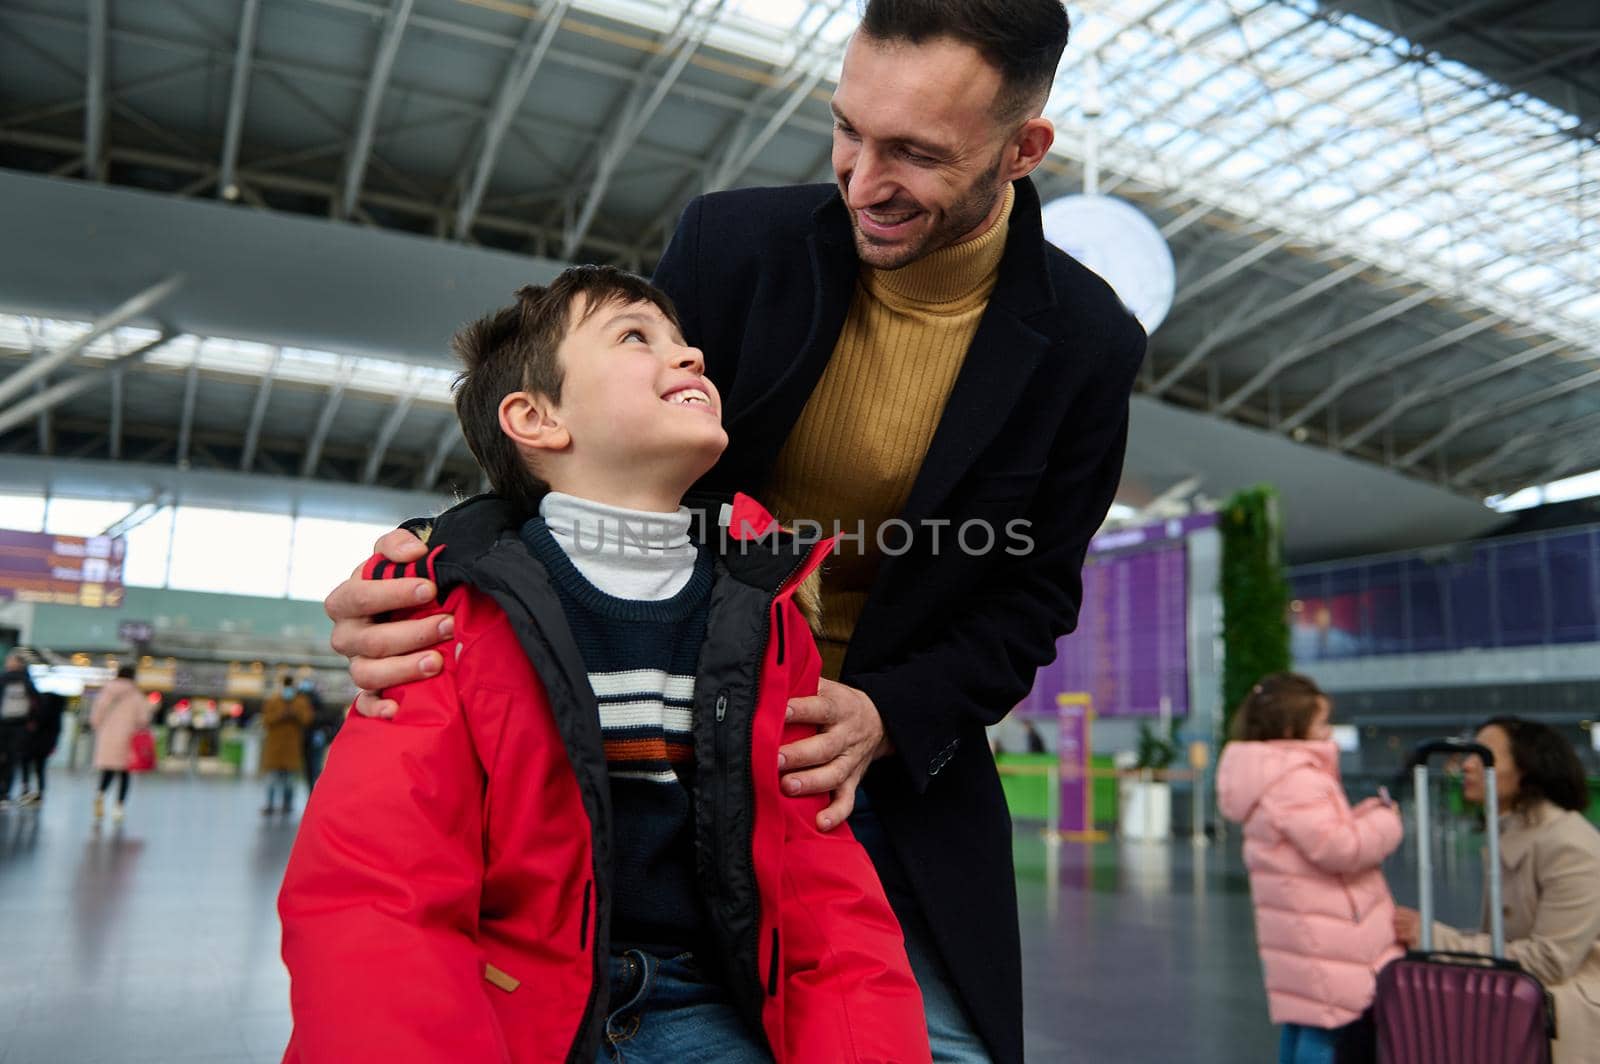 Happy young father with his adorable son in the departure hall of an international airport, waiting for flight check-in, customs control and boarding. Travel by air, winter tourism, vacation concept